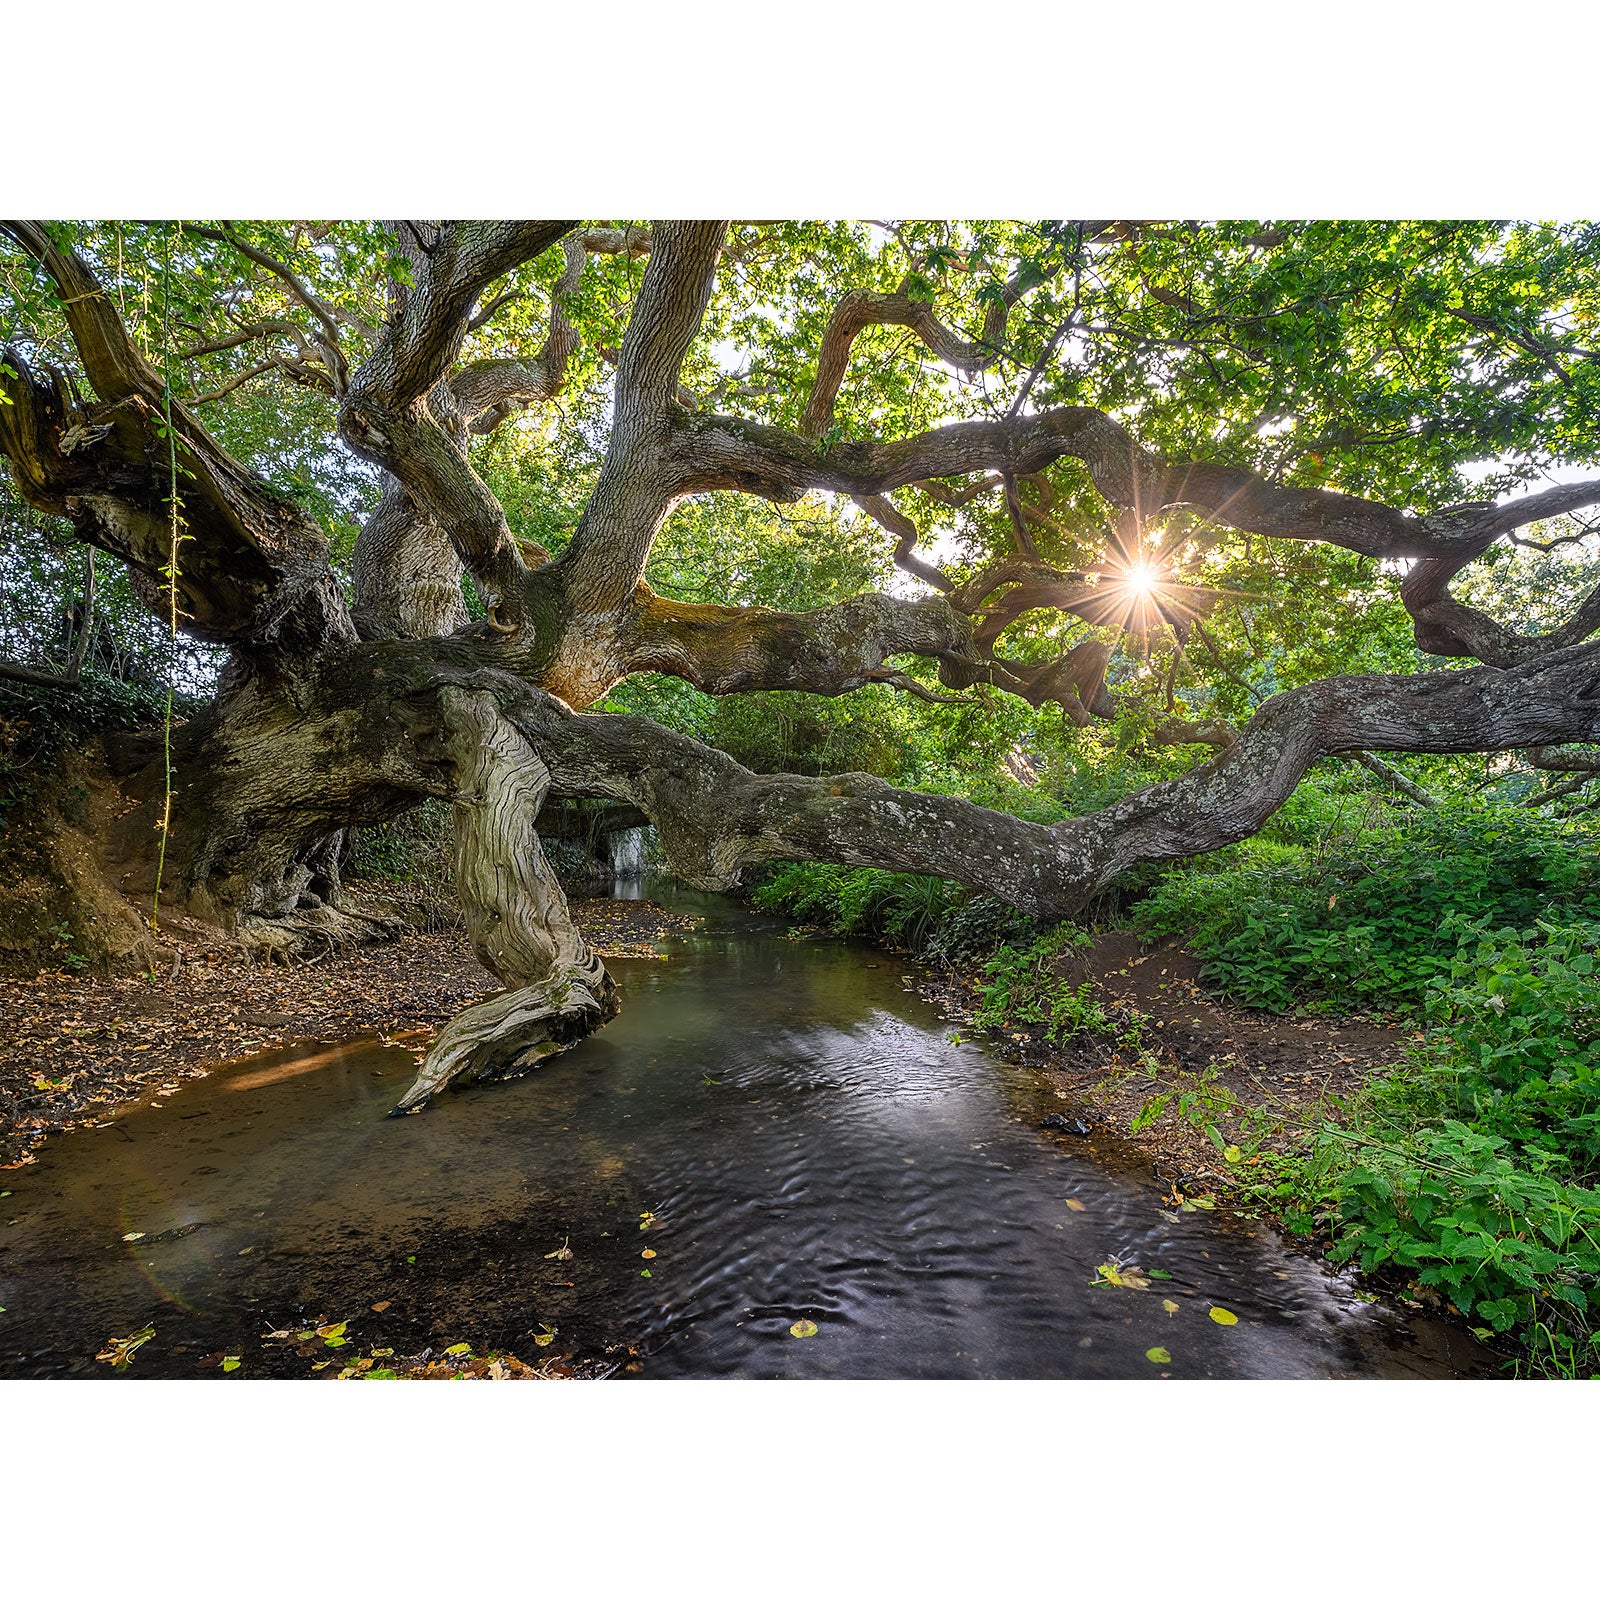 Sunlight beams through the branches of The Dragon Tree by a tranquil stream on the Isle of Wight, captured beautifully by Available Light Photography.